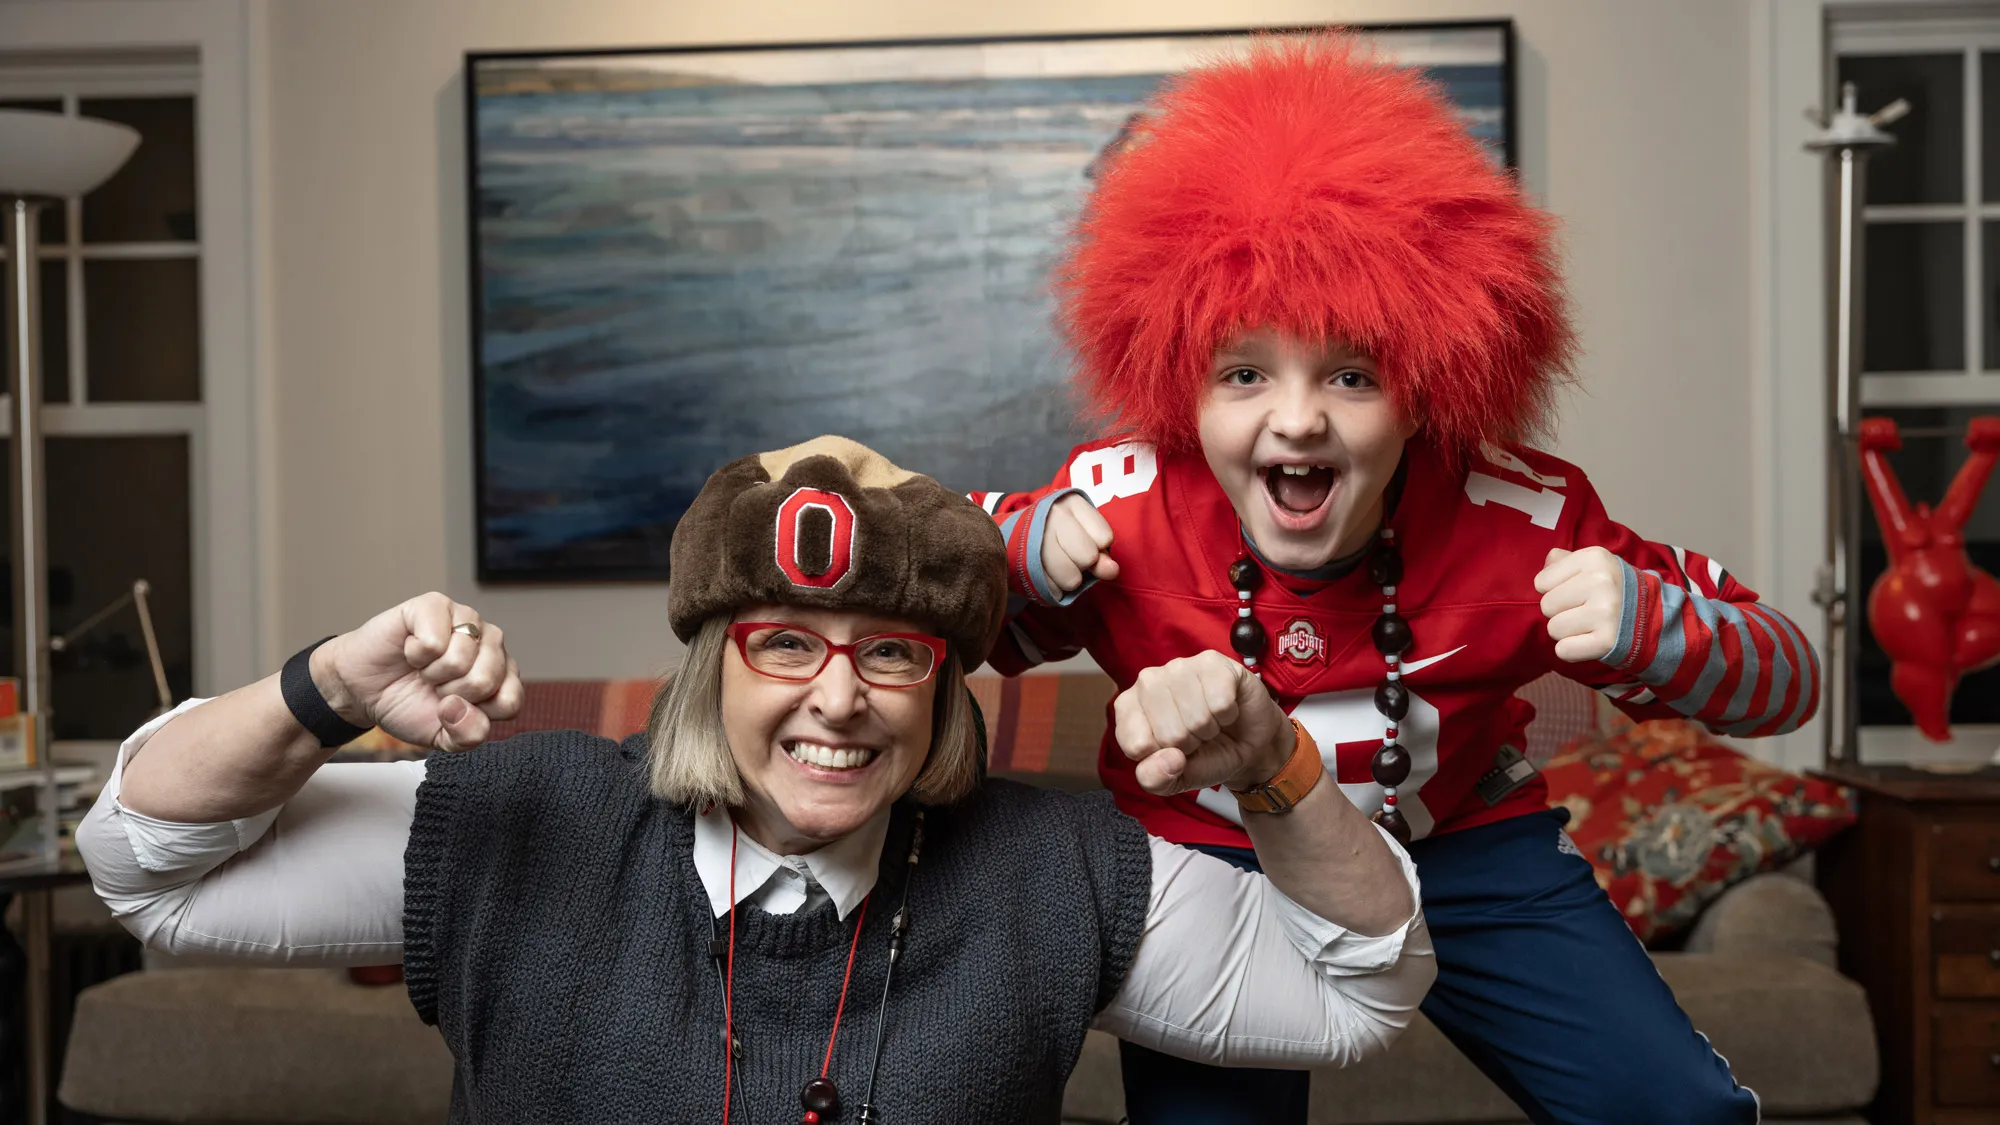 Betsy wears a buckeye necklace buckeye-shaped plush hat and her son Charlie wears a fuzzy, shaggy but short scarlet-colored wig and jersey as they both look into the camera and cheer, as if the camera is a TV showing a game-winning touchdown. They’re in their living room. 